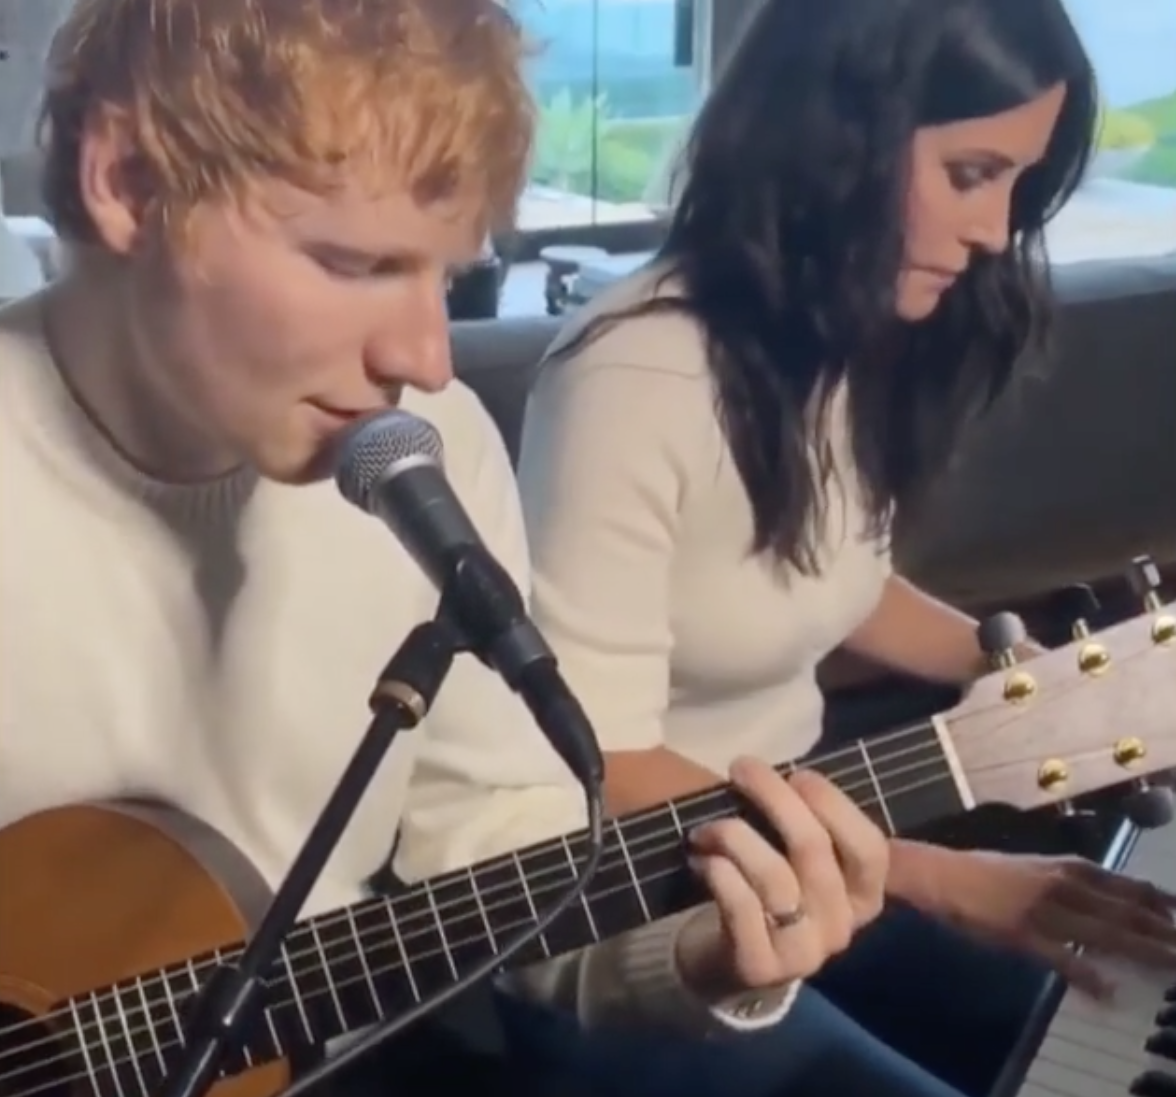 Ed and Courteney making music